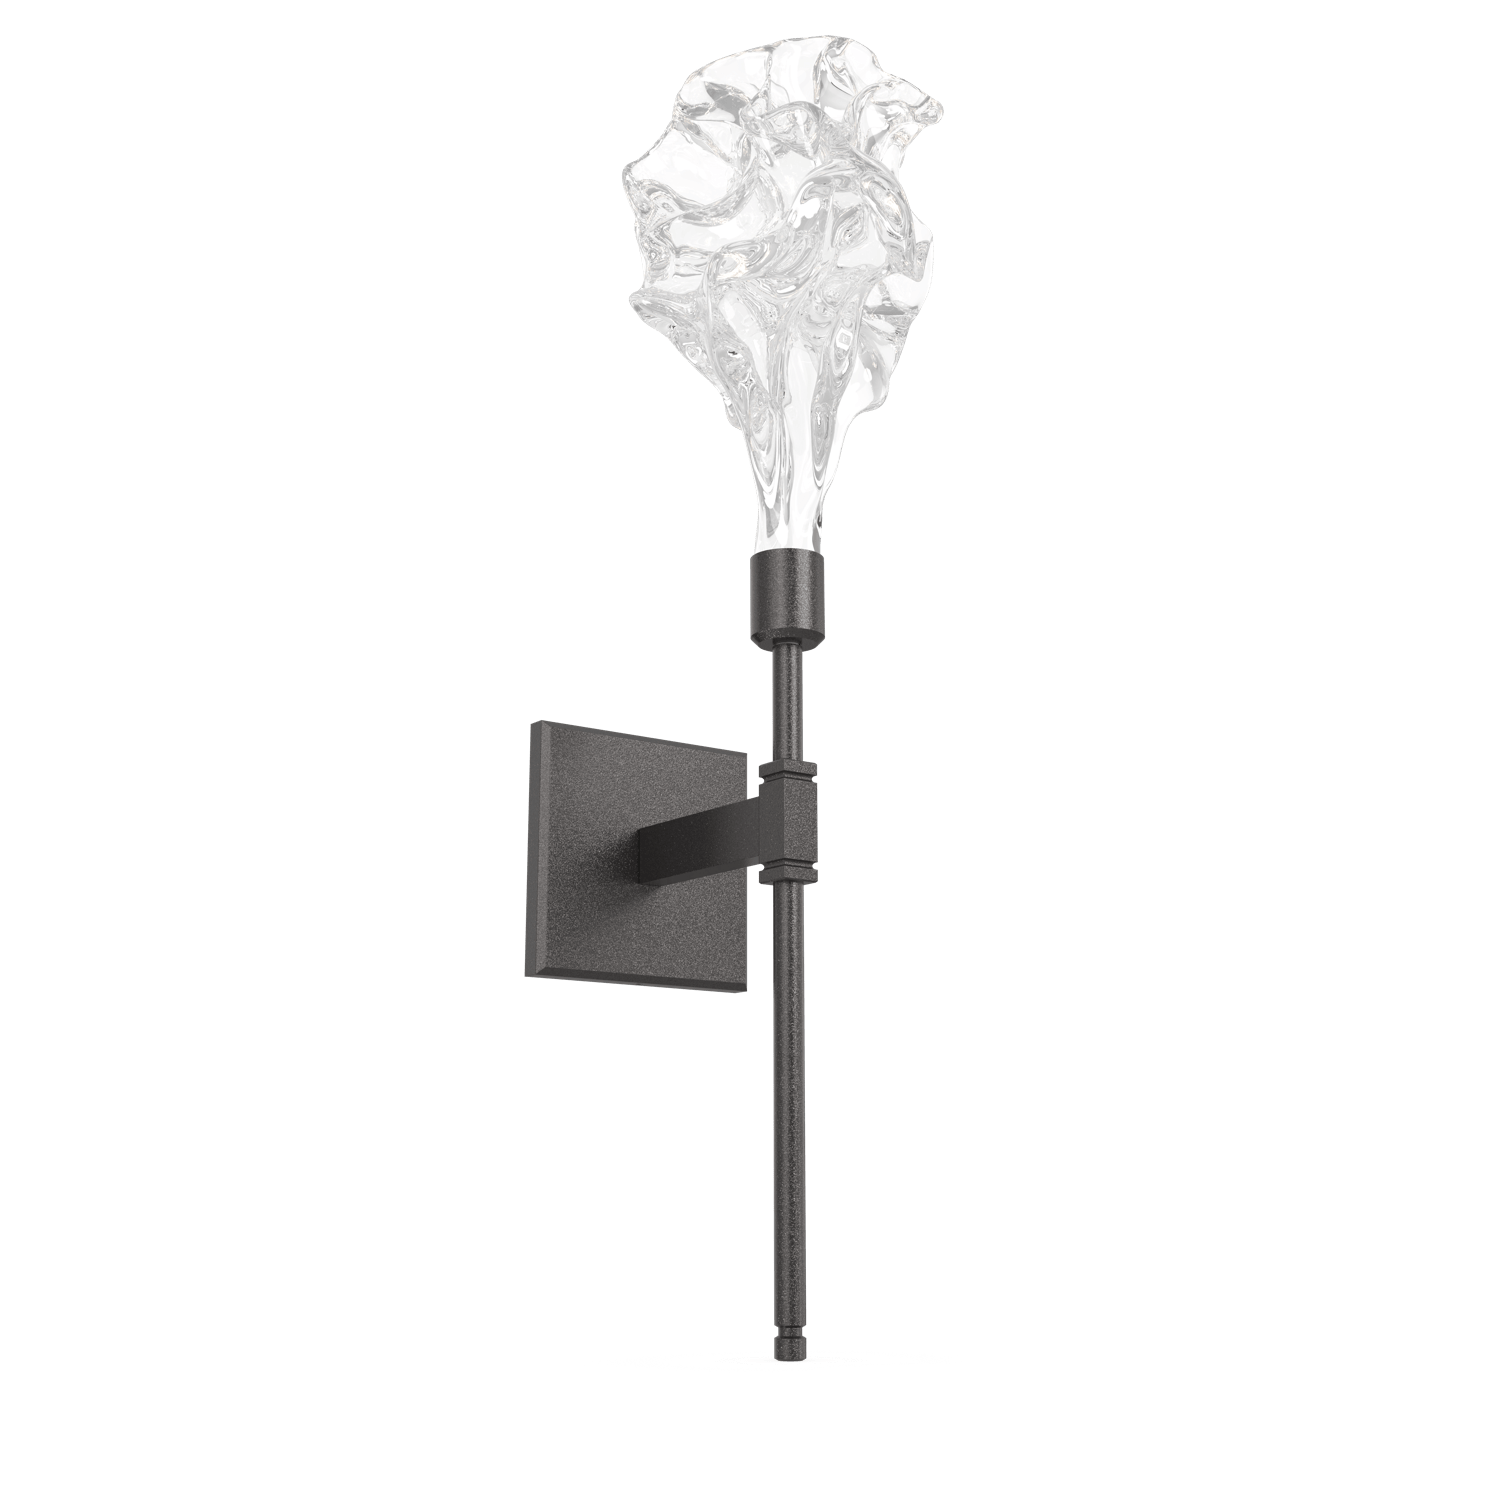 IDB0059-21-GP-Hammerton-Studio-Blossom-belvedere-wall-sconce-with-graphite-finish-and-clear-handblown-crystal-glass-shades-and-LED-lamping